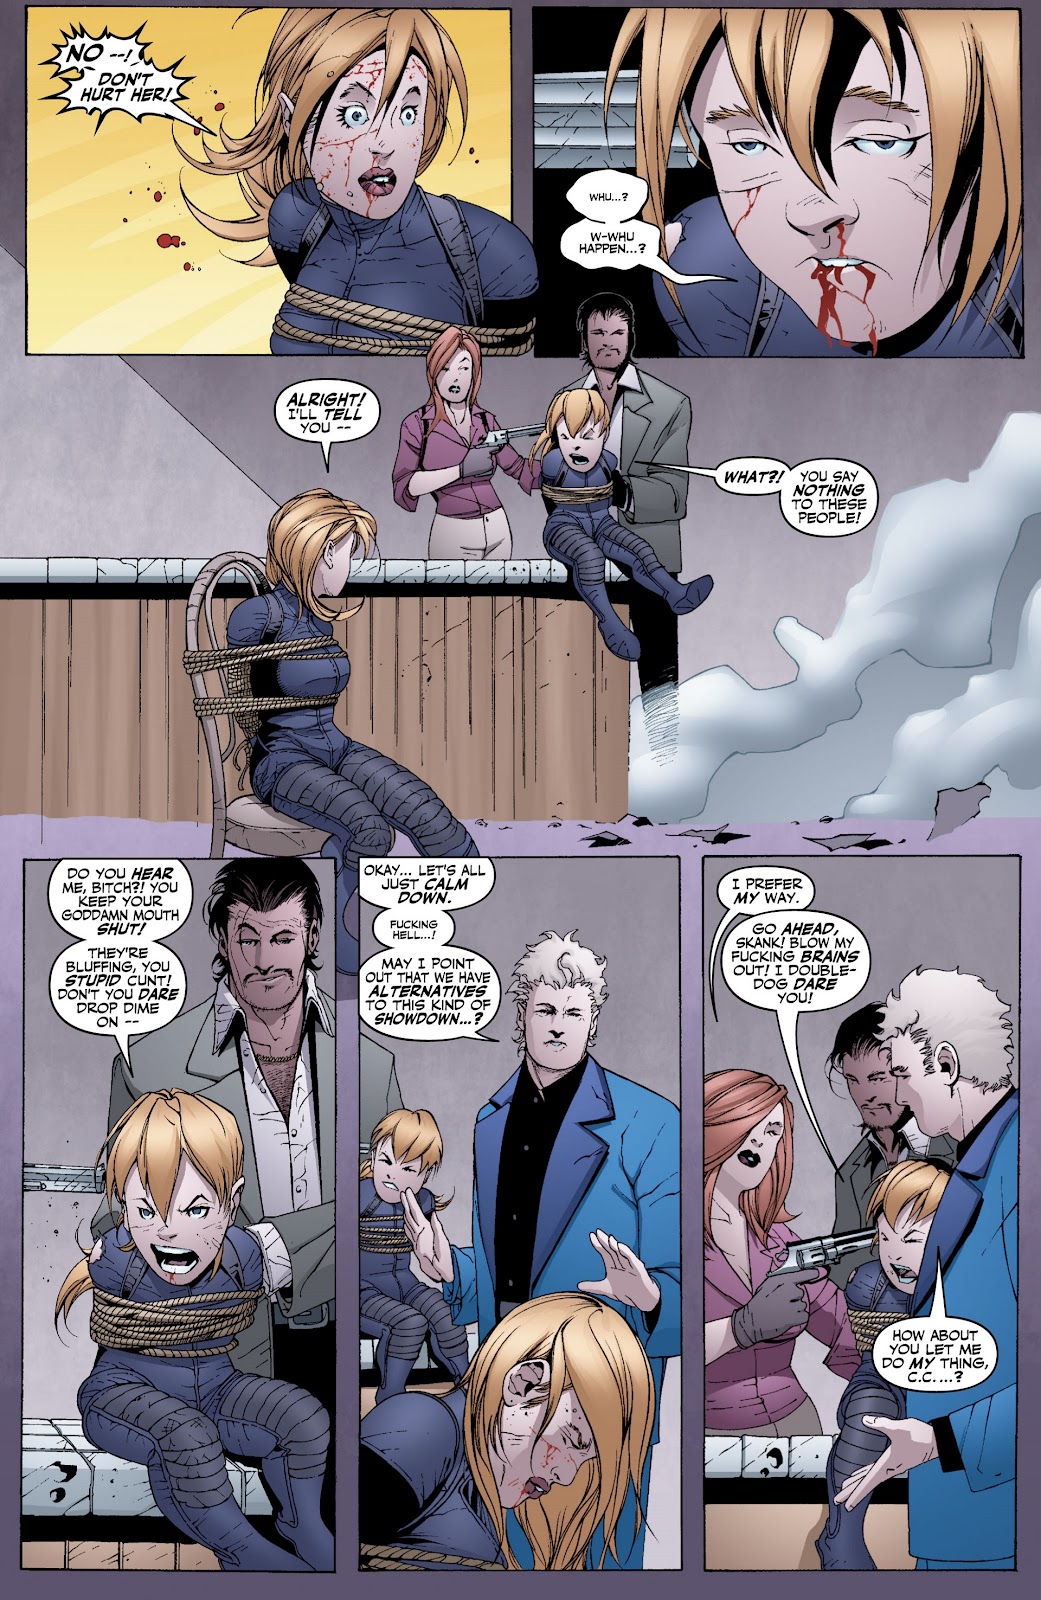 Wildcats Version 3.0 Issue #5 #5 - English 16